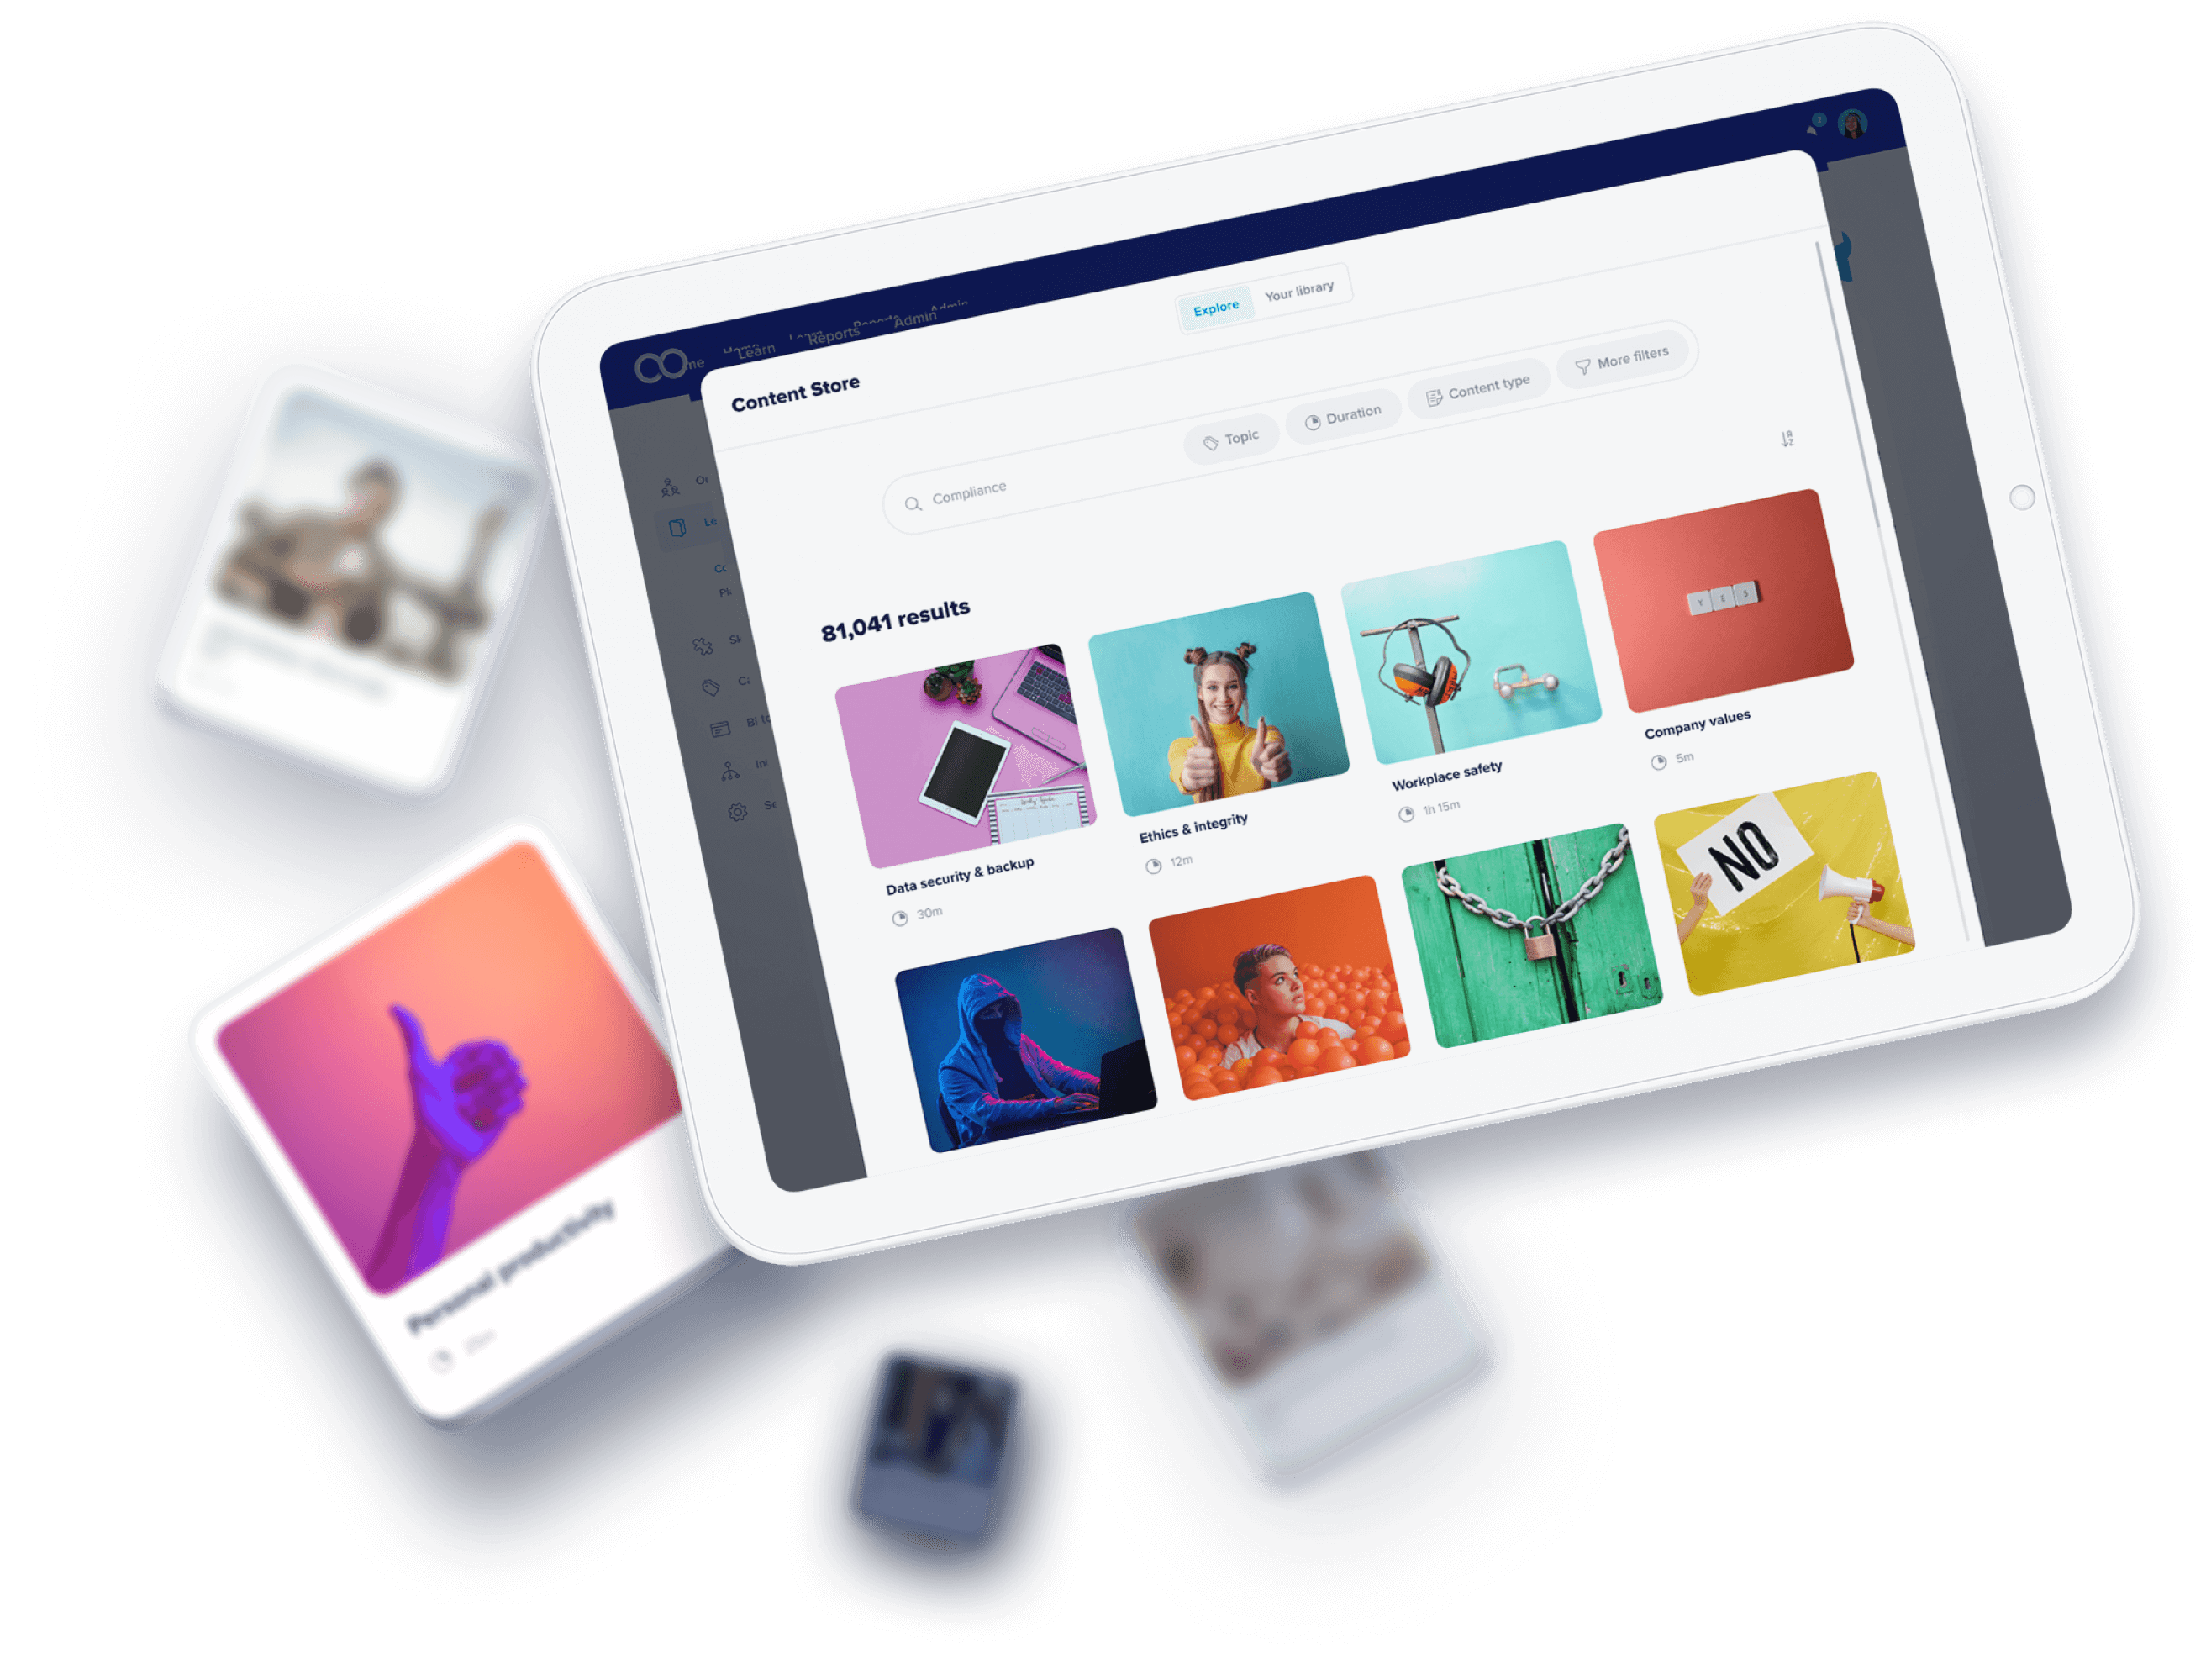 Eloomis content store with library of courses for employee onboarding